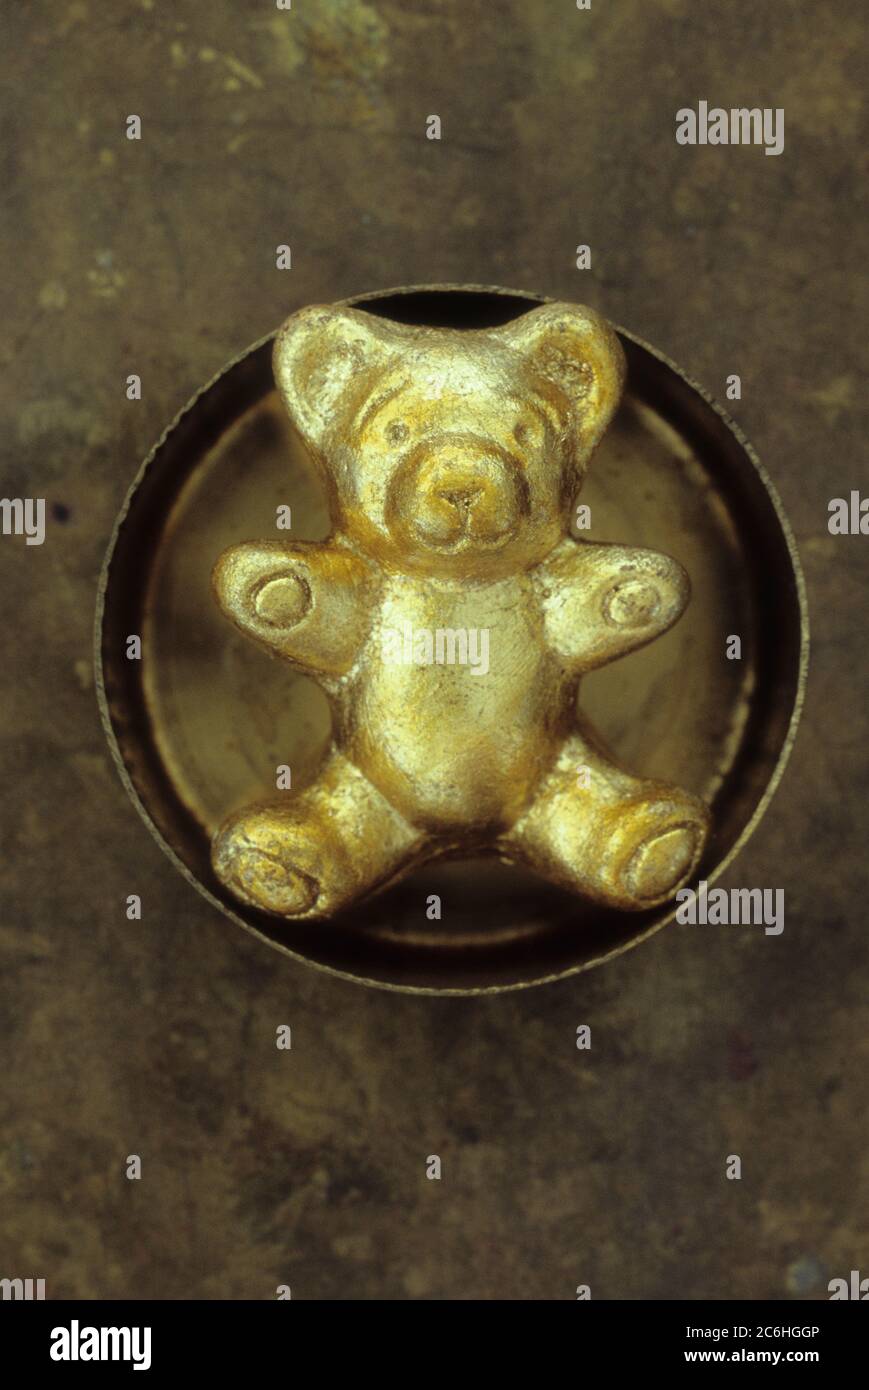 Small model of solid teddy bear painted gold and sitting with arms outstretched in brass dish Stock Photo